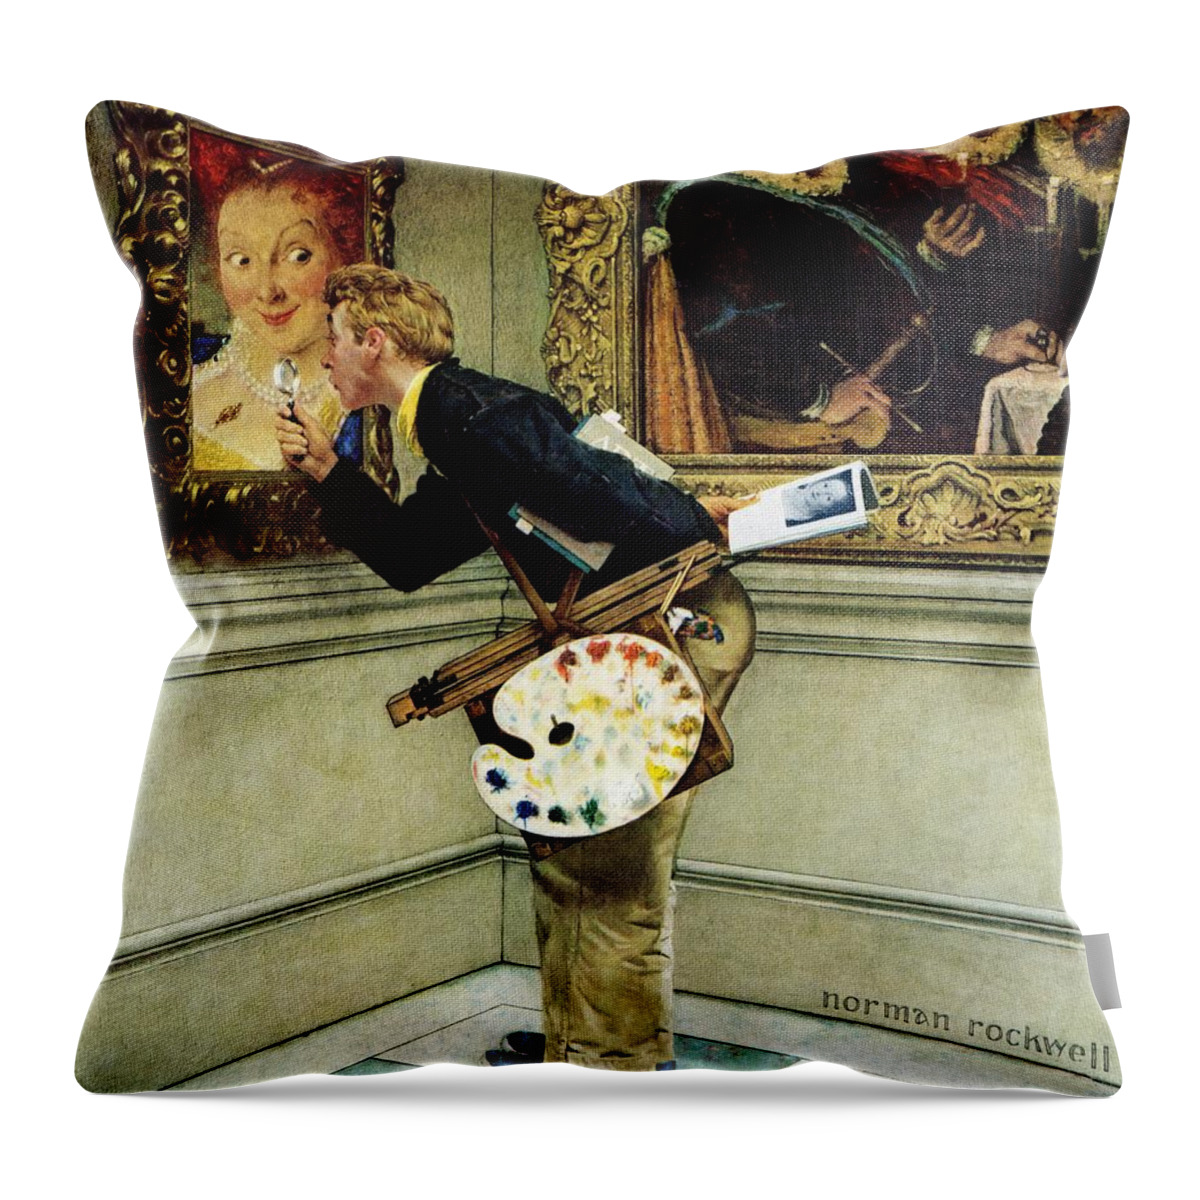 Artists Throw Pillow featuring the painting Art Critic by Norman Rockwell